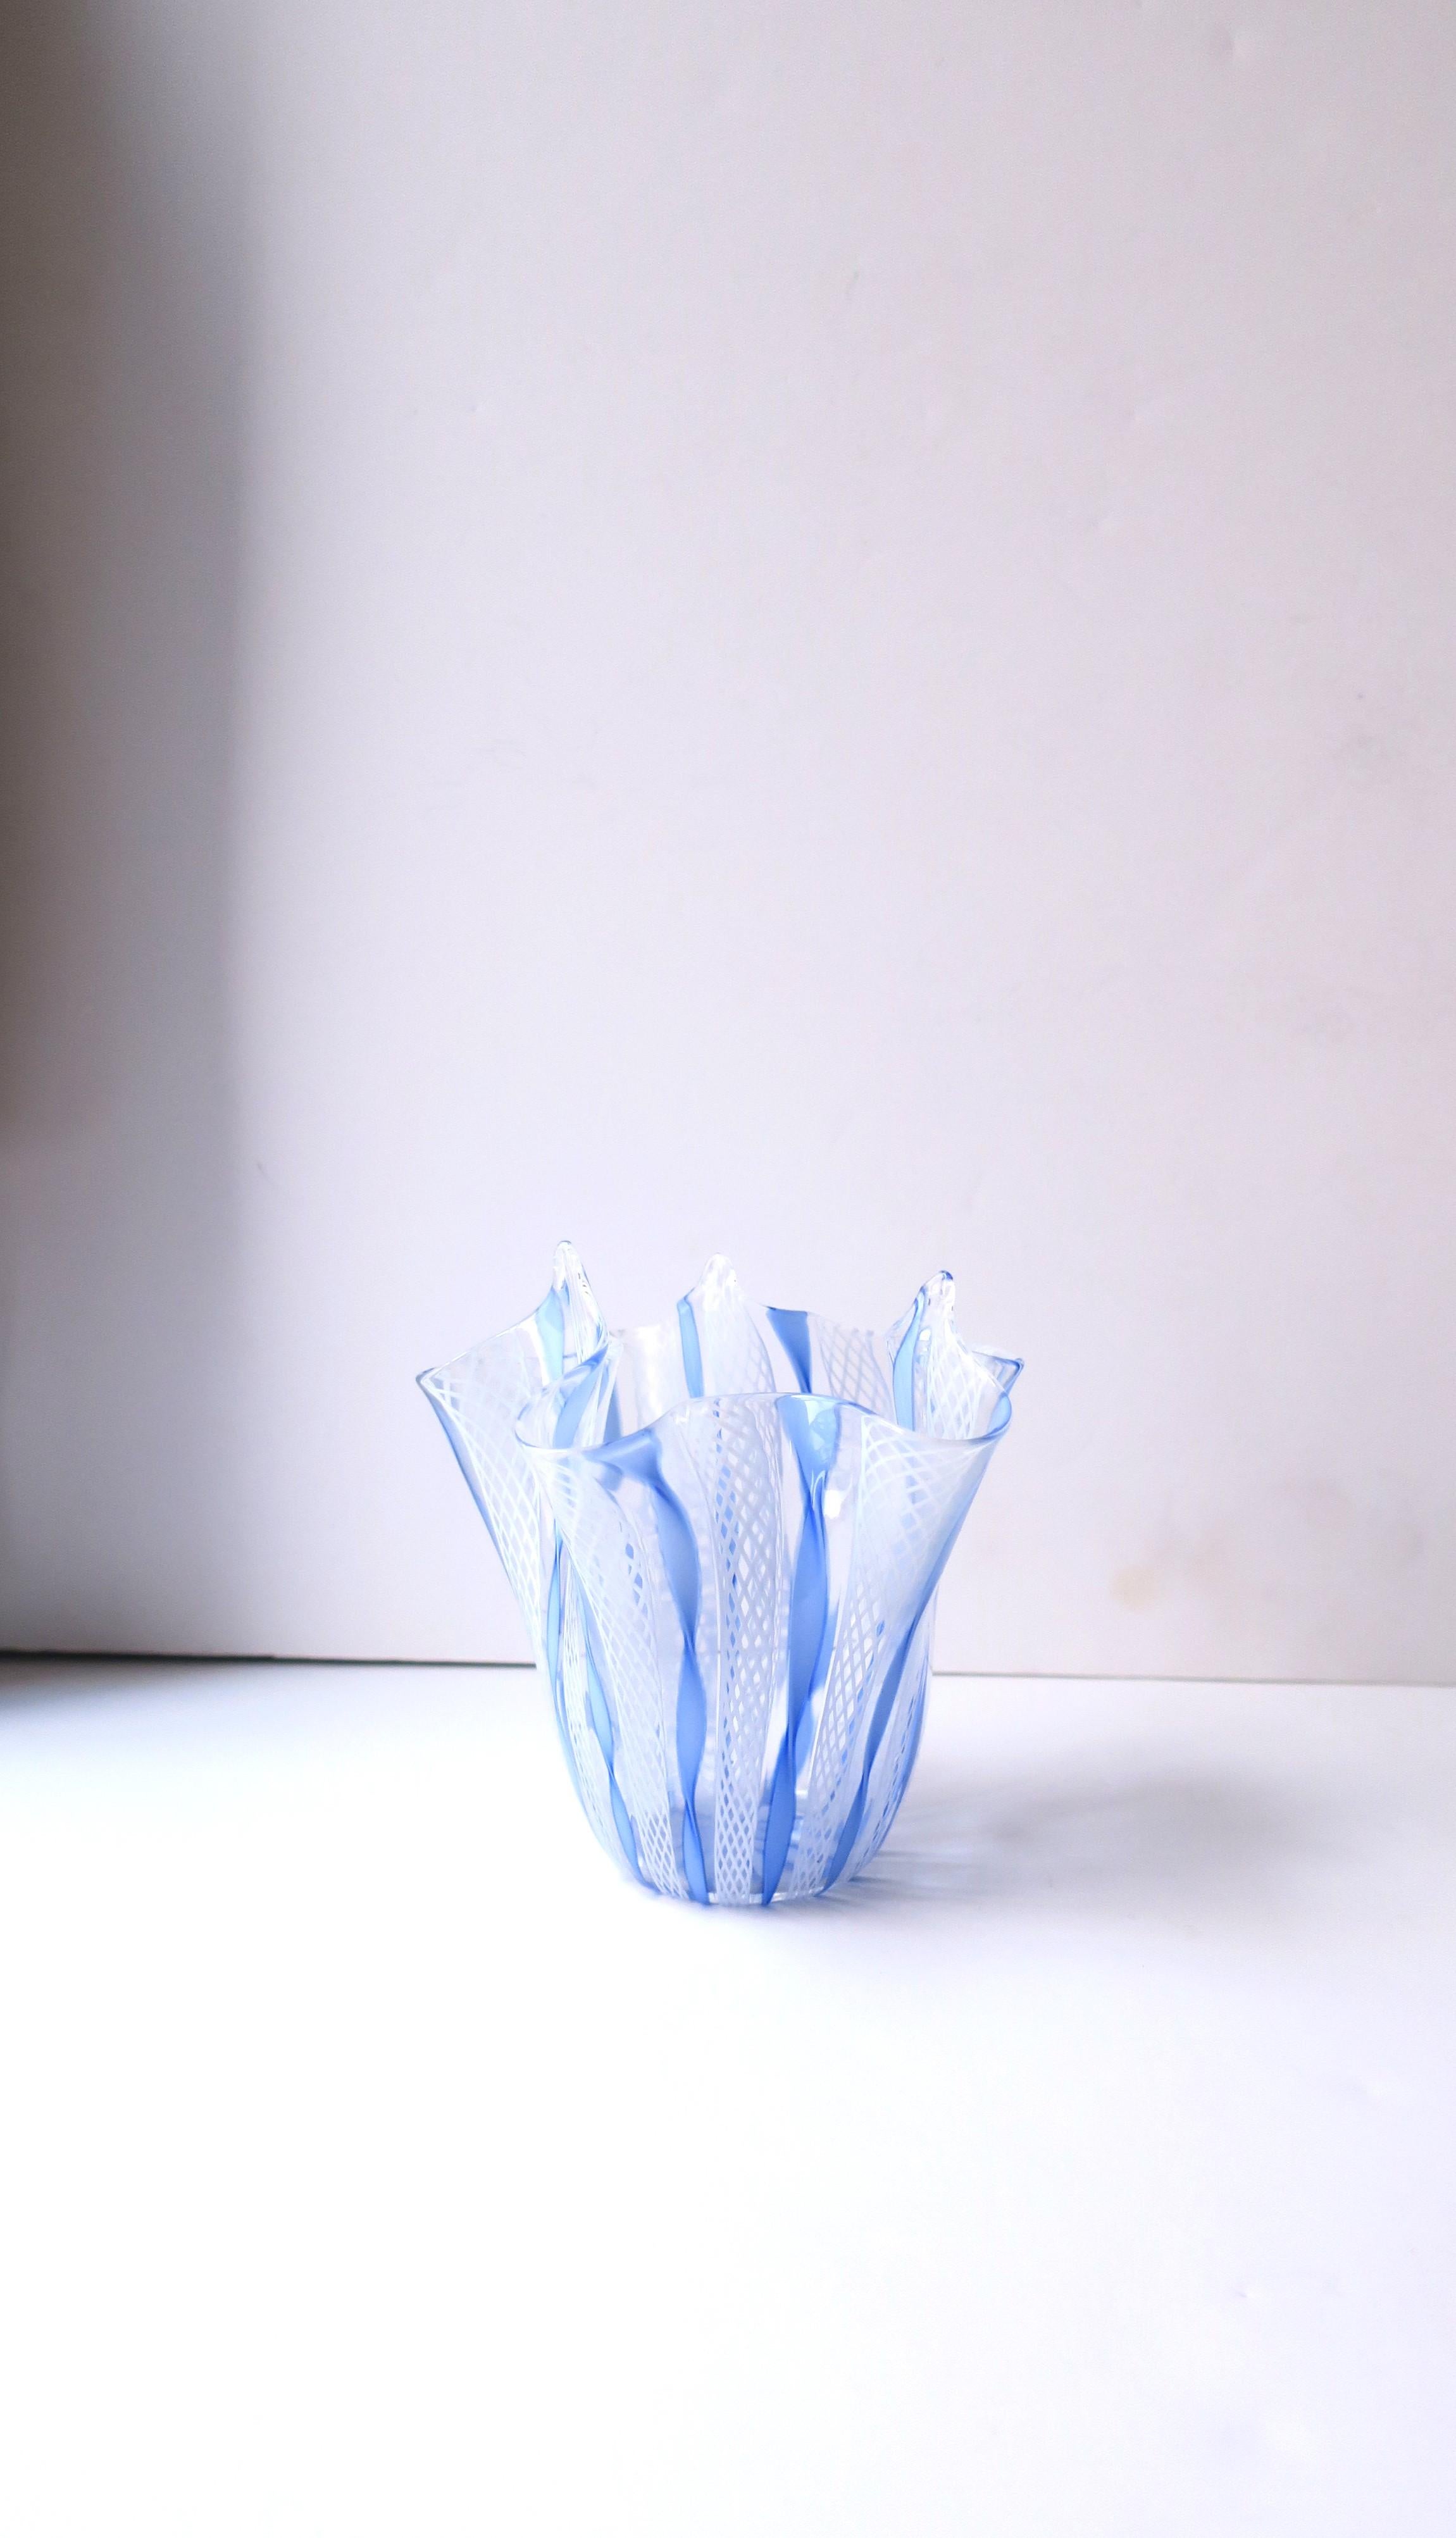 A beautiful, authentic, Italian Murano fazzoletto (handkerchief) vase in clear/transparent, blue, and white art glass, in the Venini style, circa mid-20th century, Italy. This beautiful hand-crafted Italian handkerchief vase has intricate design of